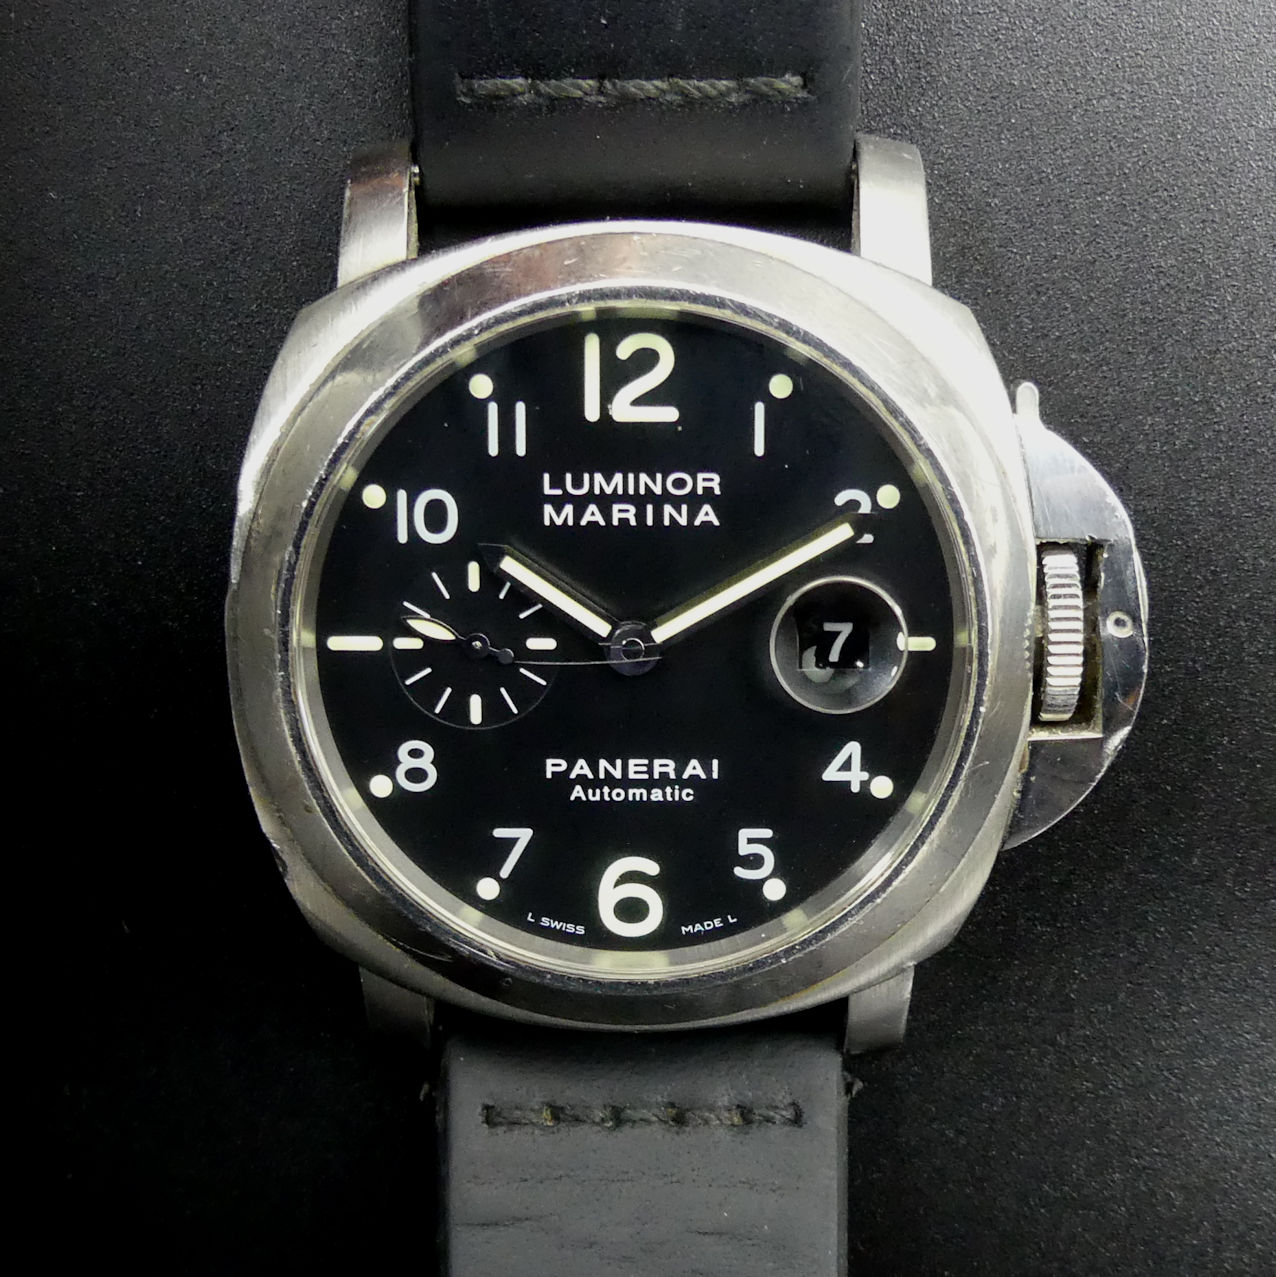 Panerai Luminor Marina automatic stainless steel wristwatch, with a leather strap and Panerai